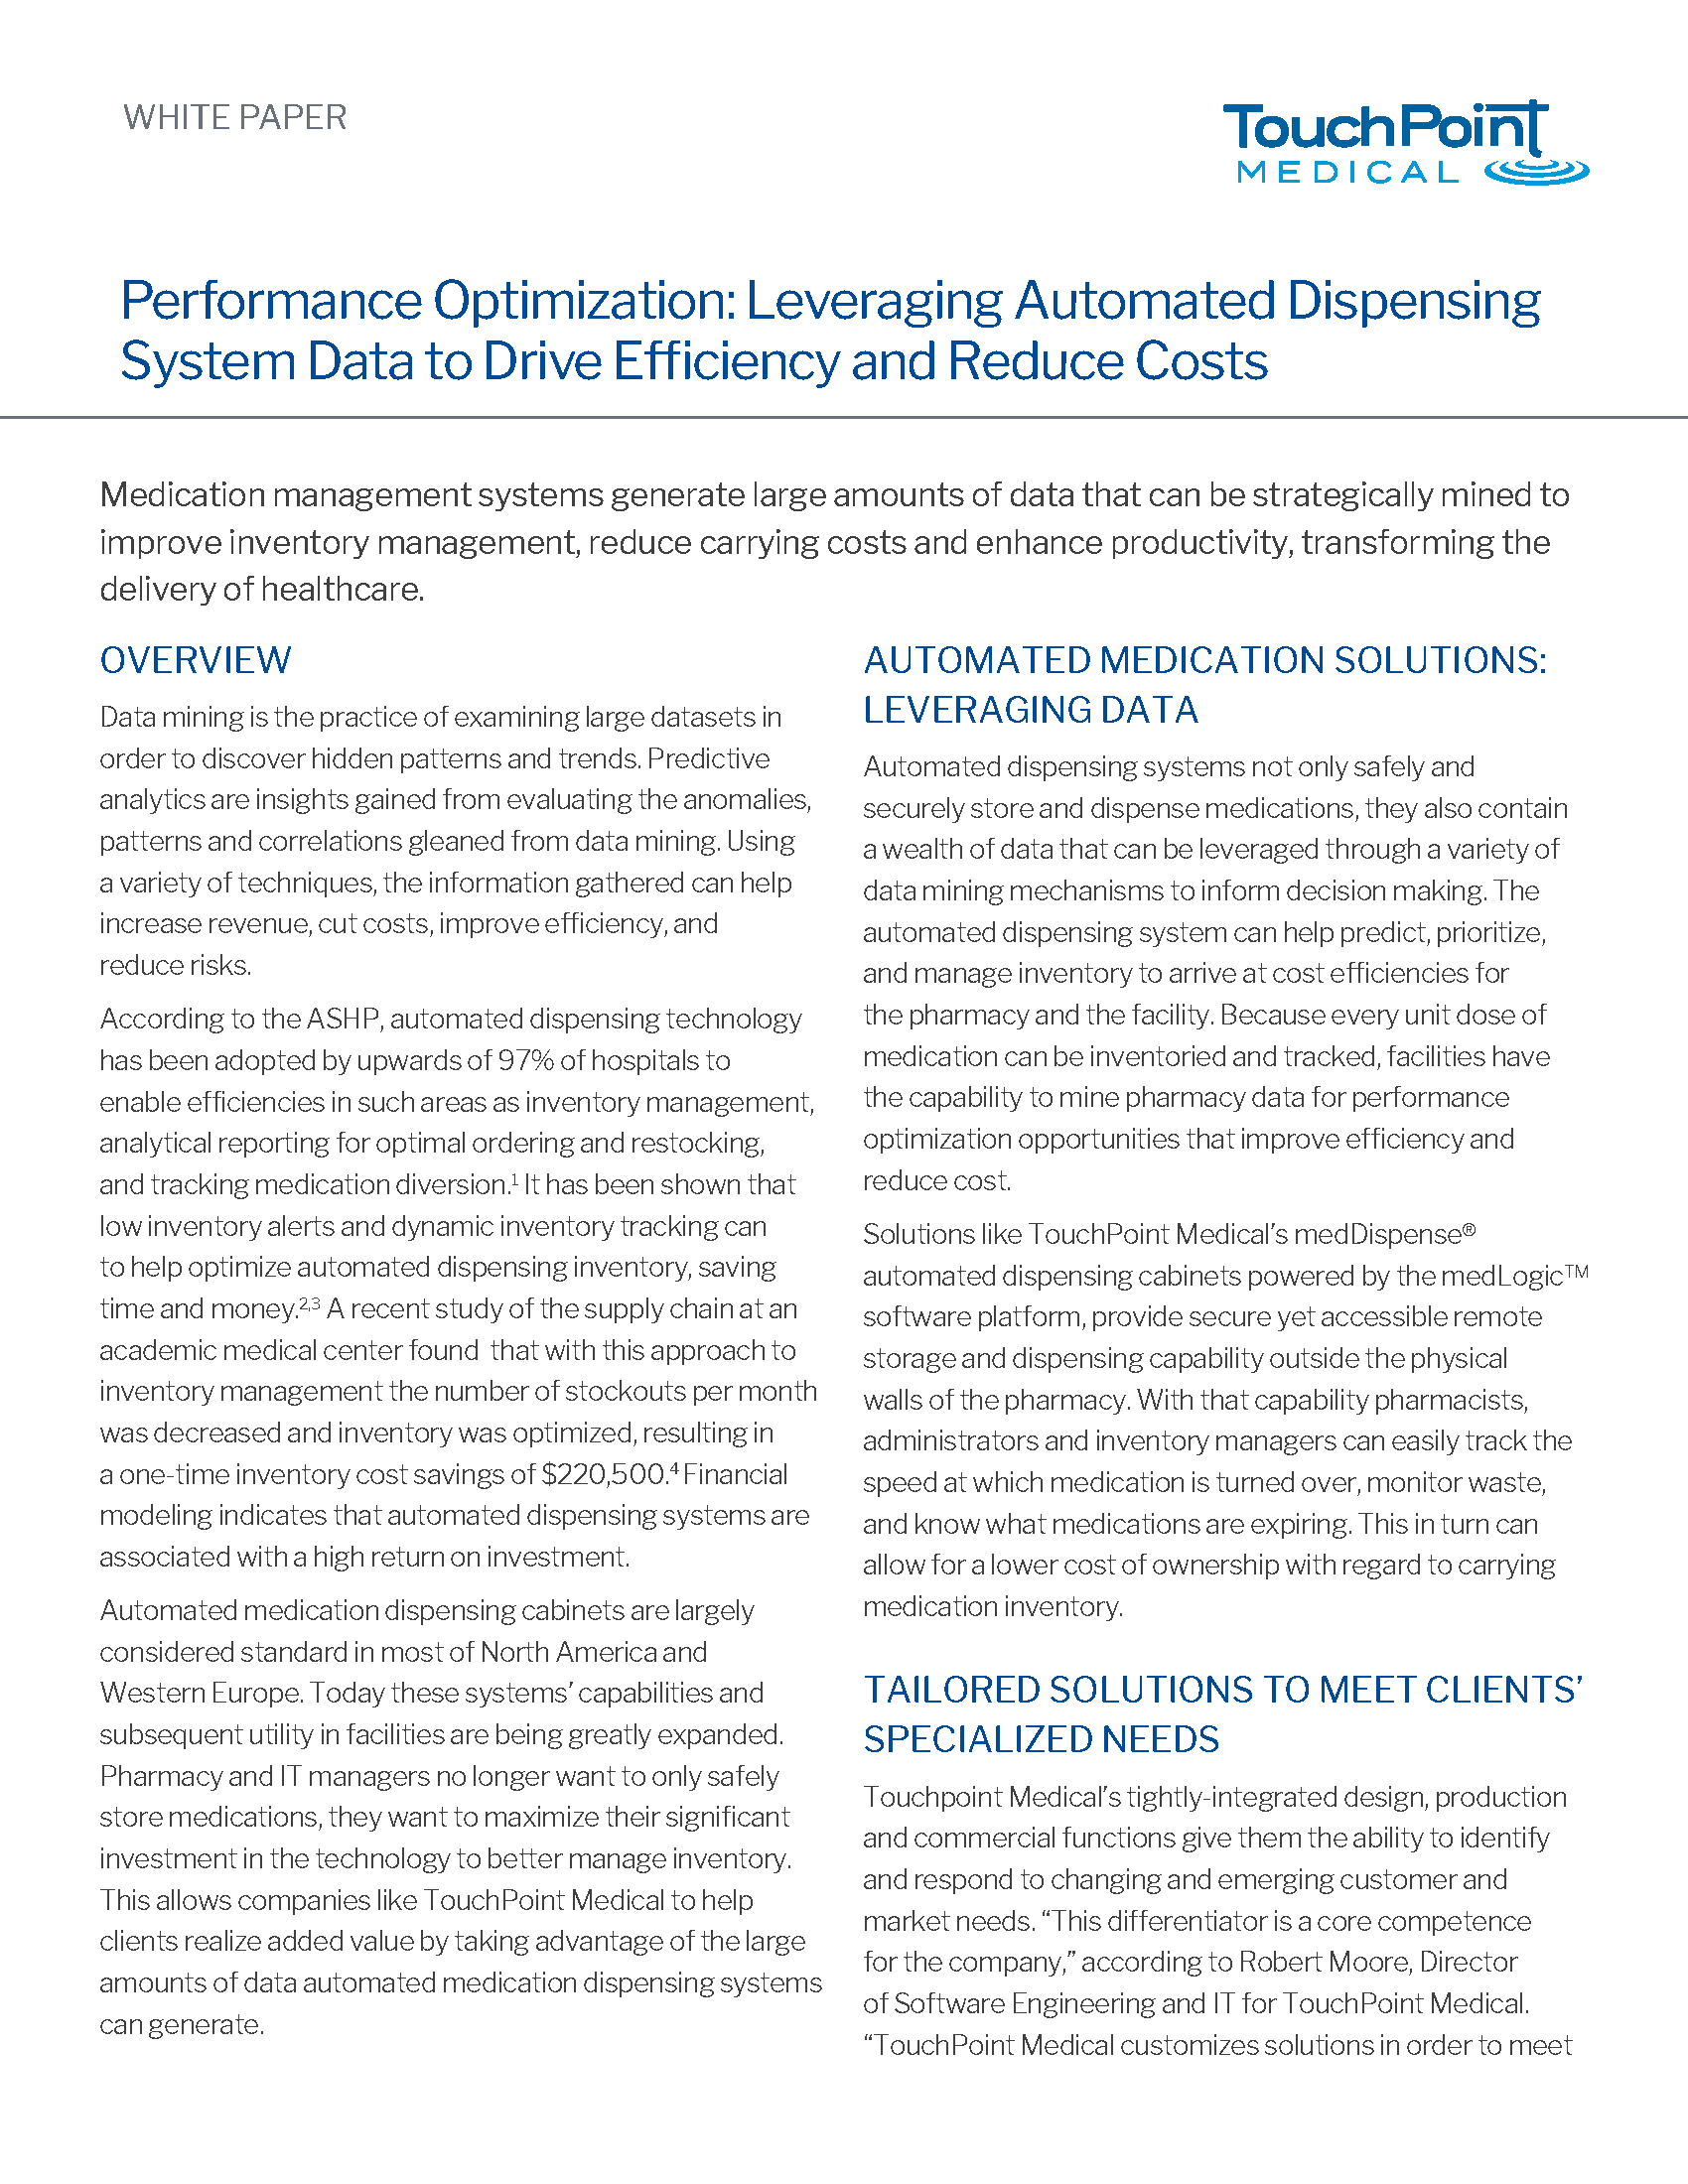 Leveraging-Automated-Dispensing-System-Data-White-Paper_Page_1.png